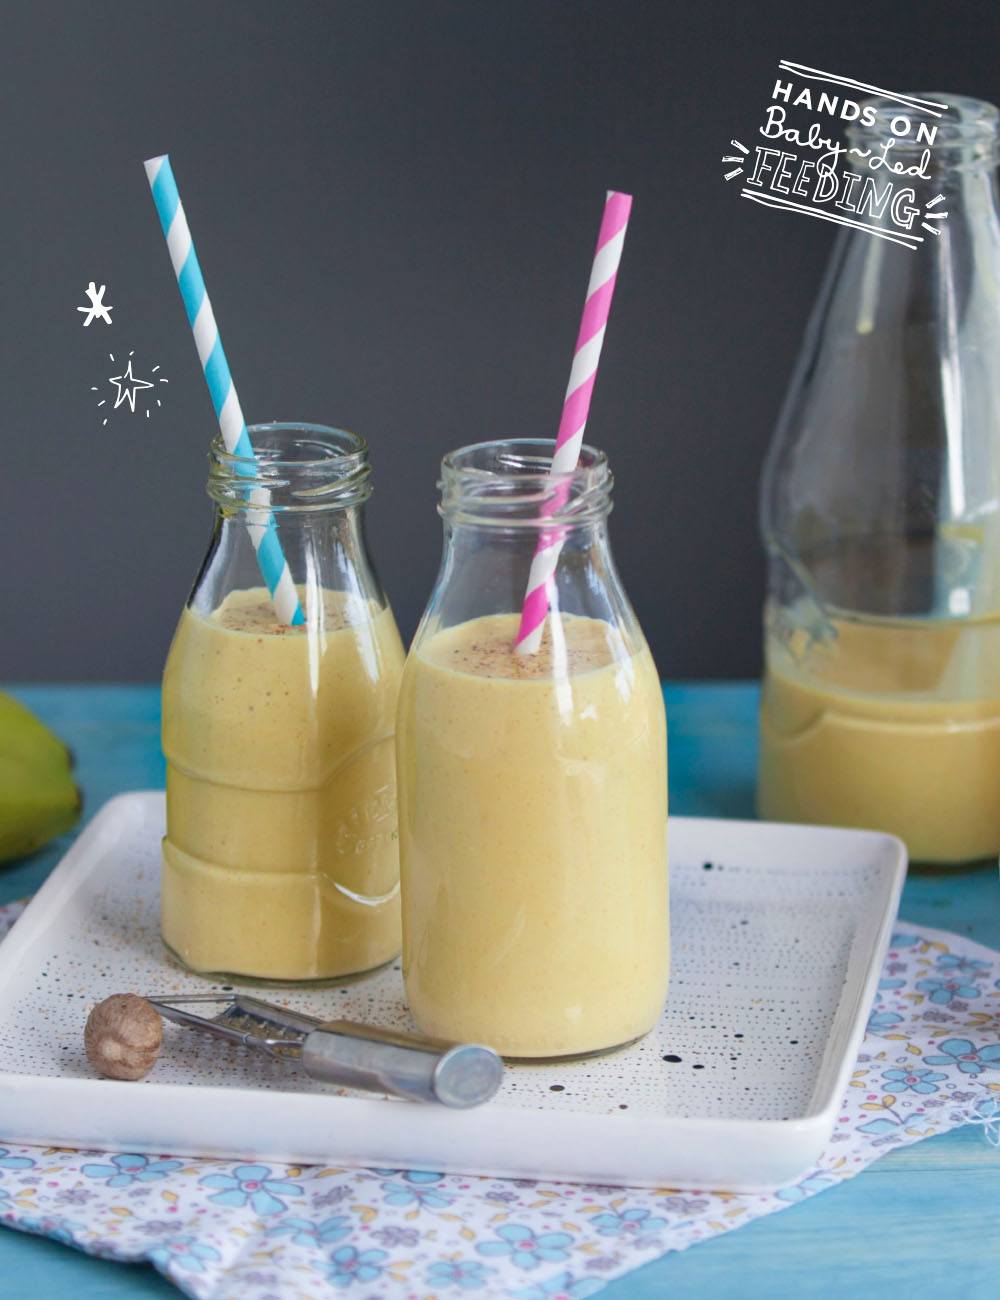 Turmeric and Banana Lassi Baby Led Feeding Large Smoothie Image. A deliciously healthy and creamy smoothie full of yummy goodness. These can also be frozen to make teething pops for babies.